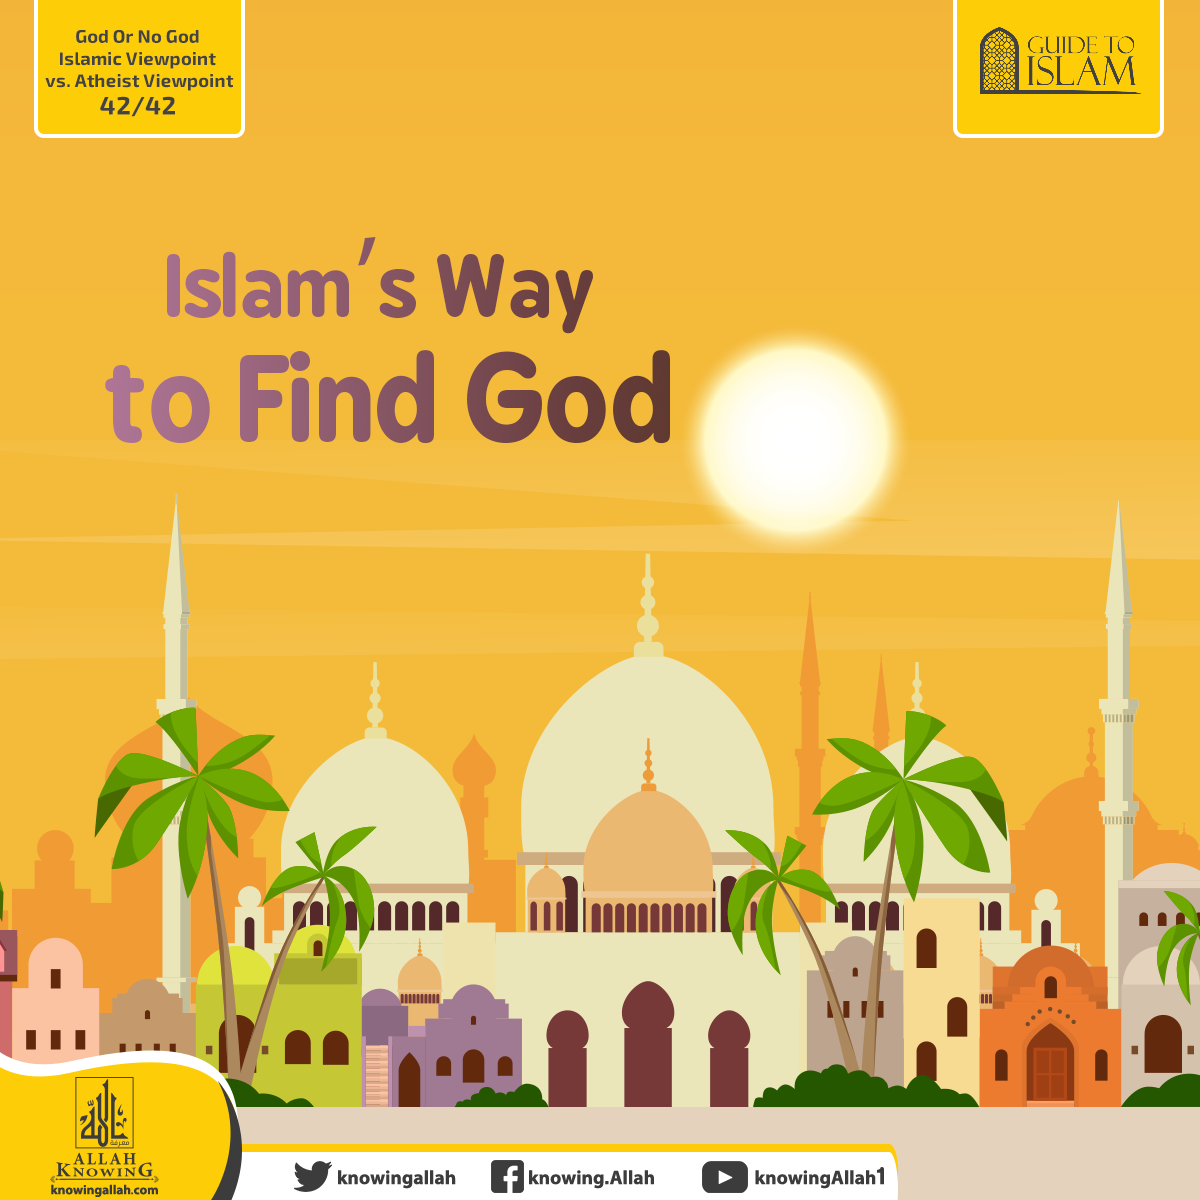 Islam’s Way to Find God